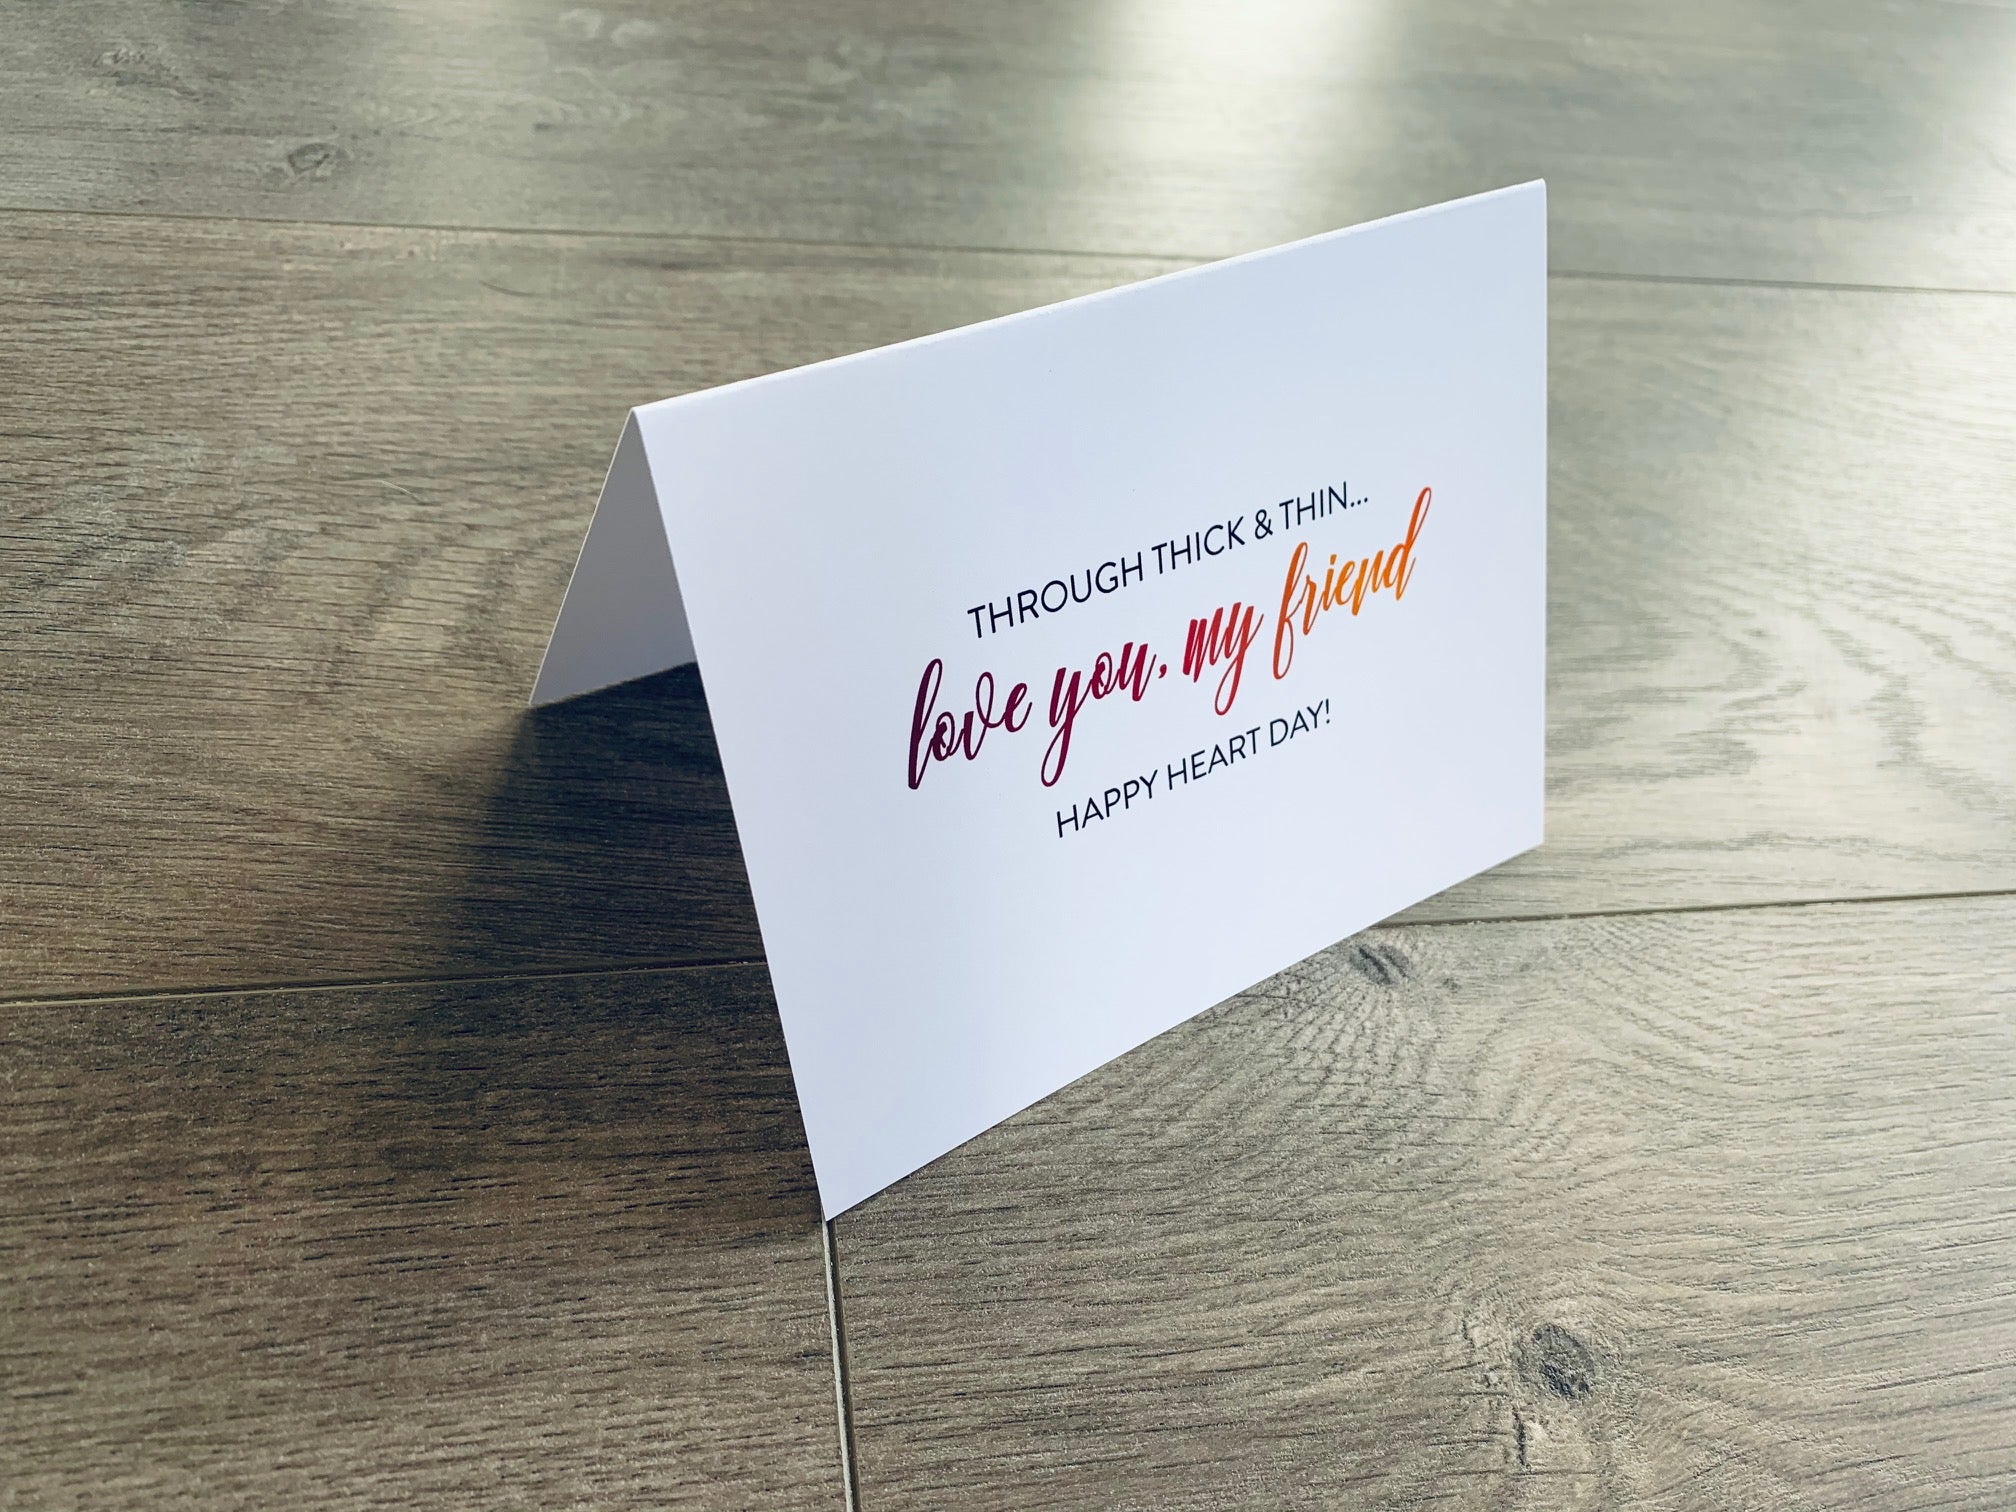 A folded white notecard is folded and propped up on a gray wooden background. The card says, "Through thick and thin... love you, my friend. Happy Heart Day!" VDay BFFs collection by Stationare.